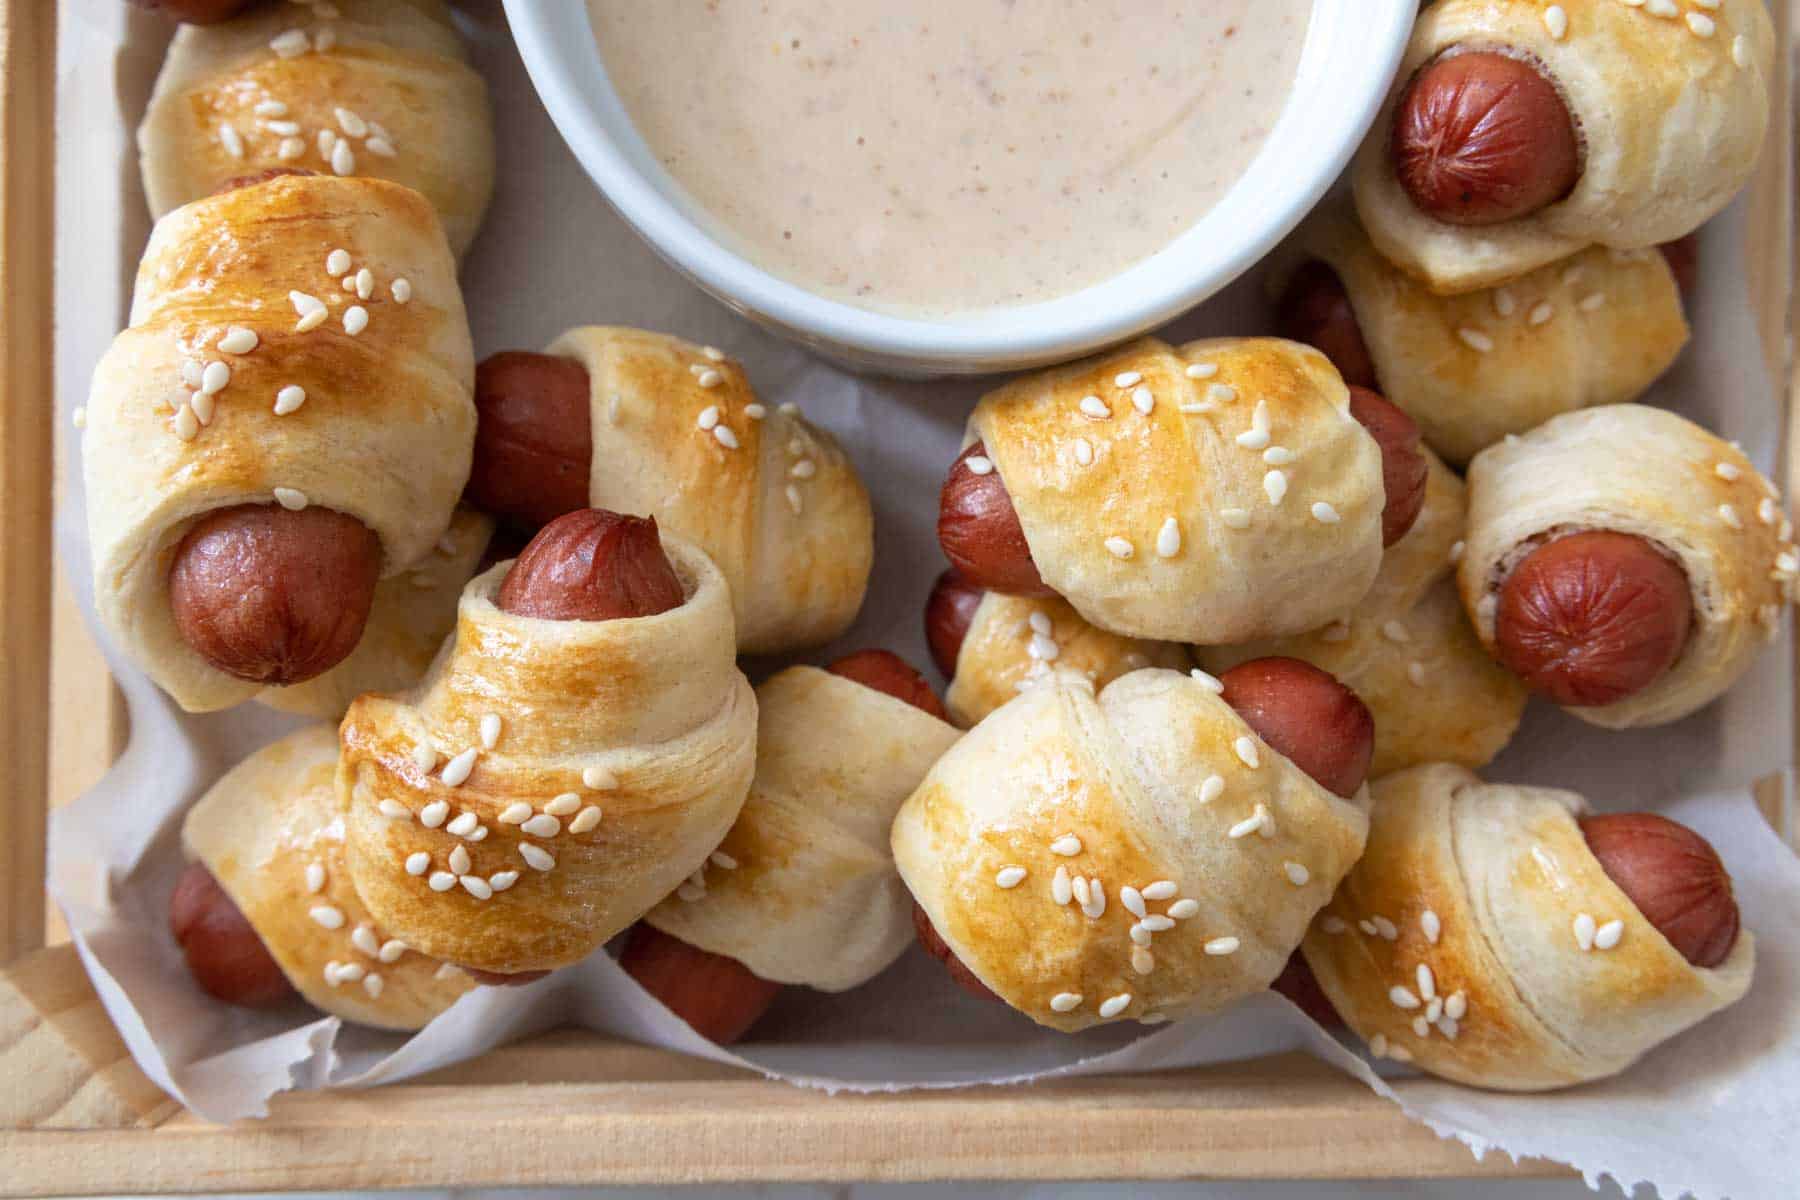 Pigs in a blanket in a serving tray.